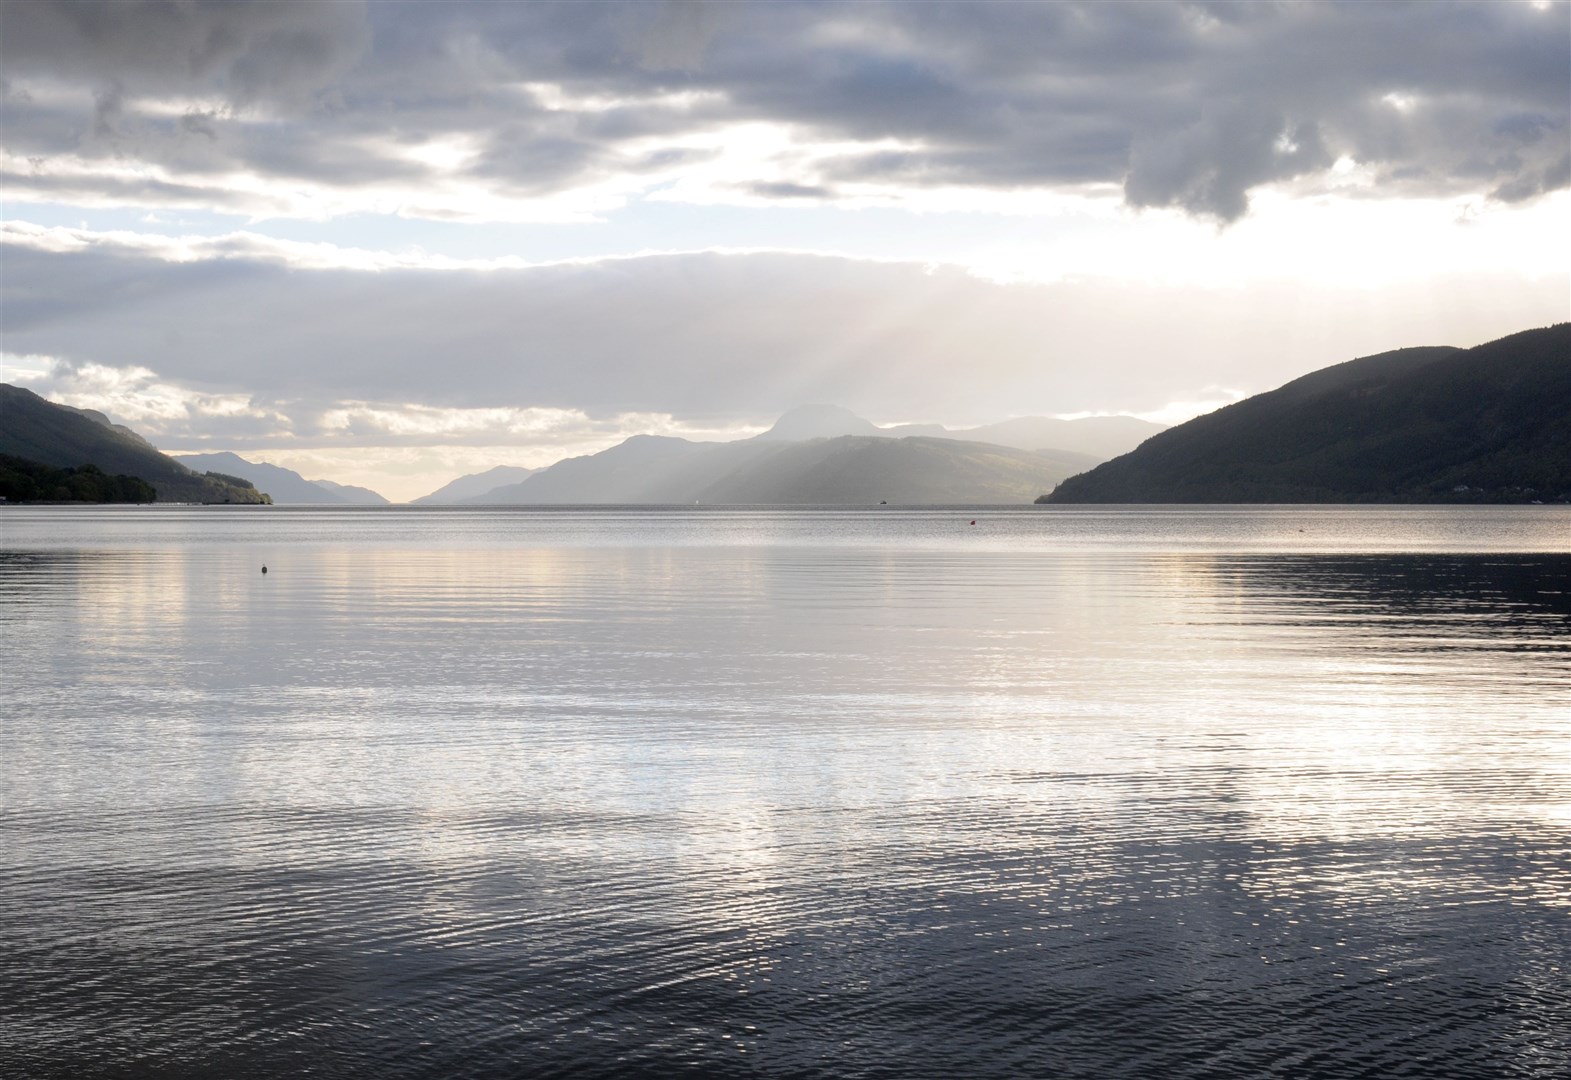 An unidentified movement on Loch Ness has been reported by visitors to the area.